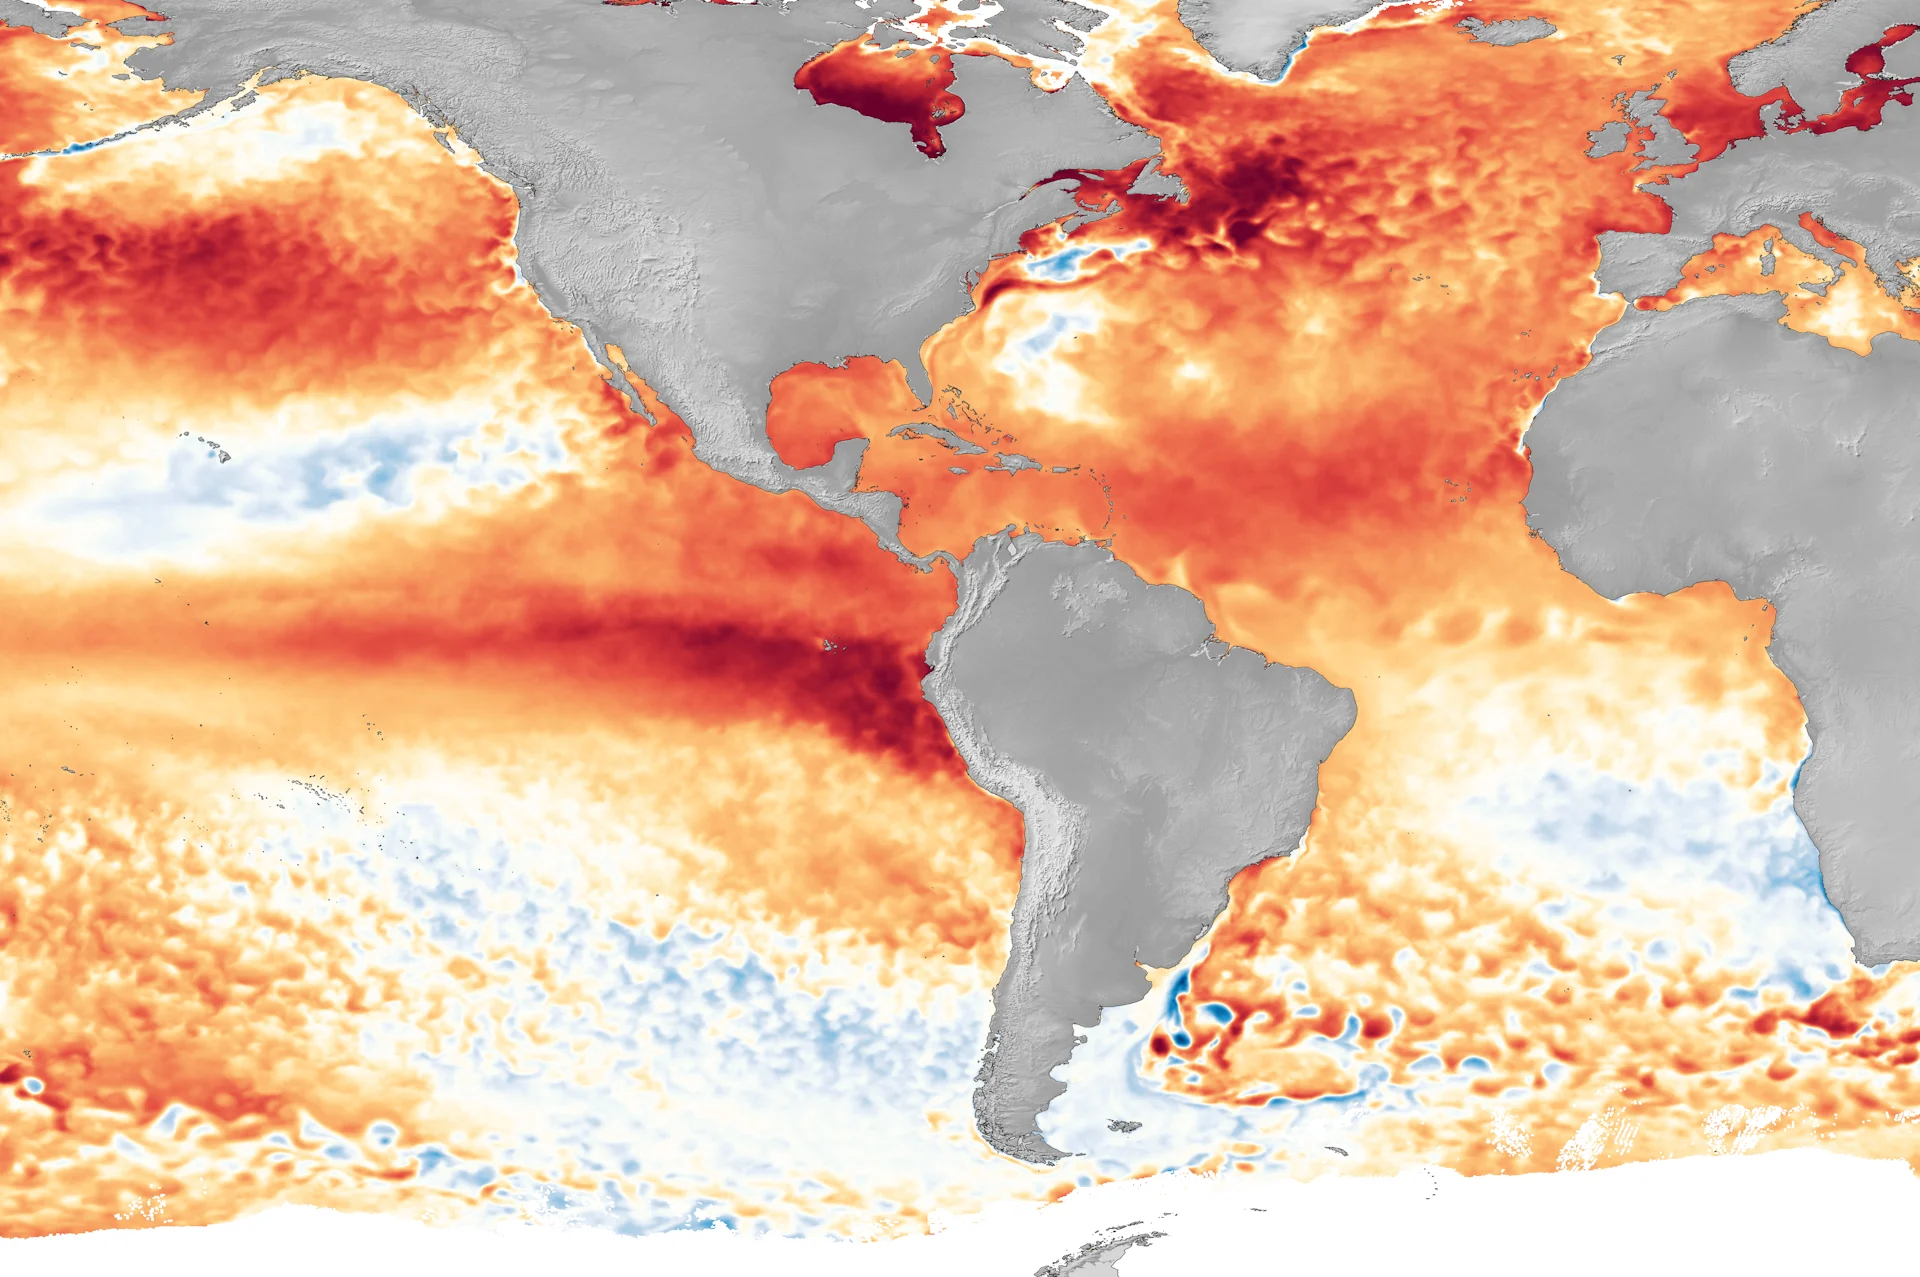 A ‘historically strong’ El Niño is possible heading into winter